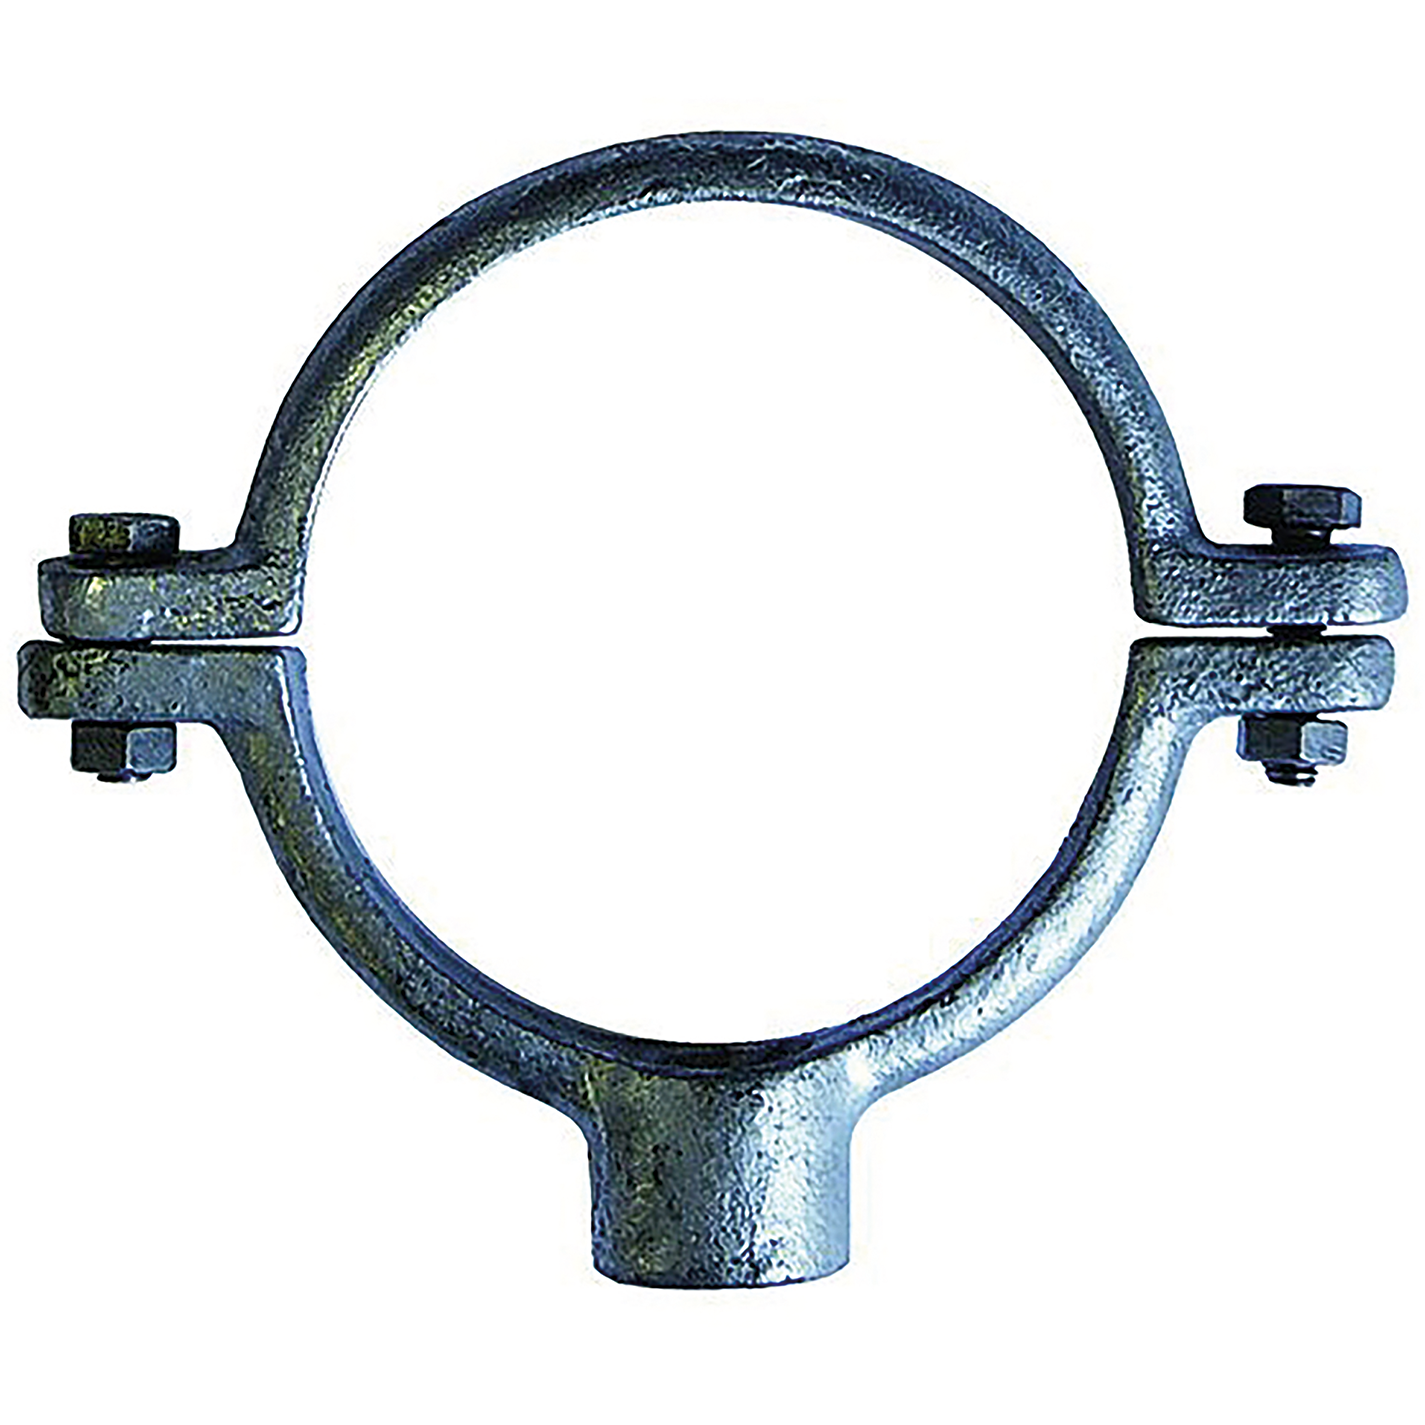 2 1/2" (65mm)SINGLE M12TAPPING PIPE RING GALVE